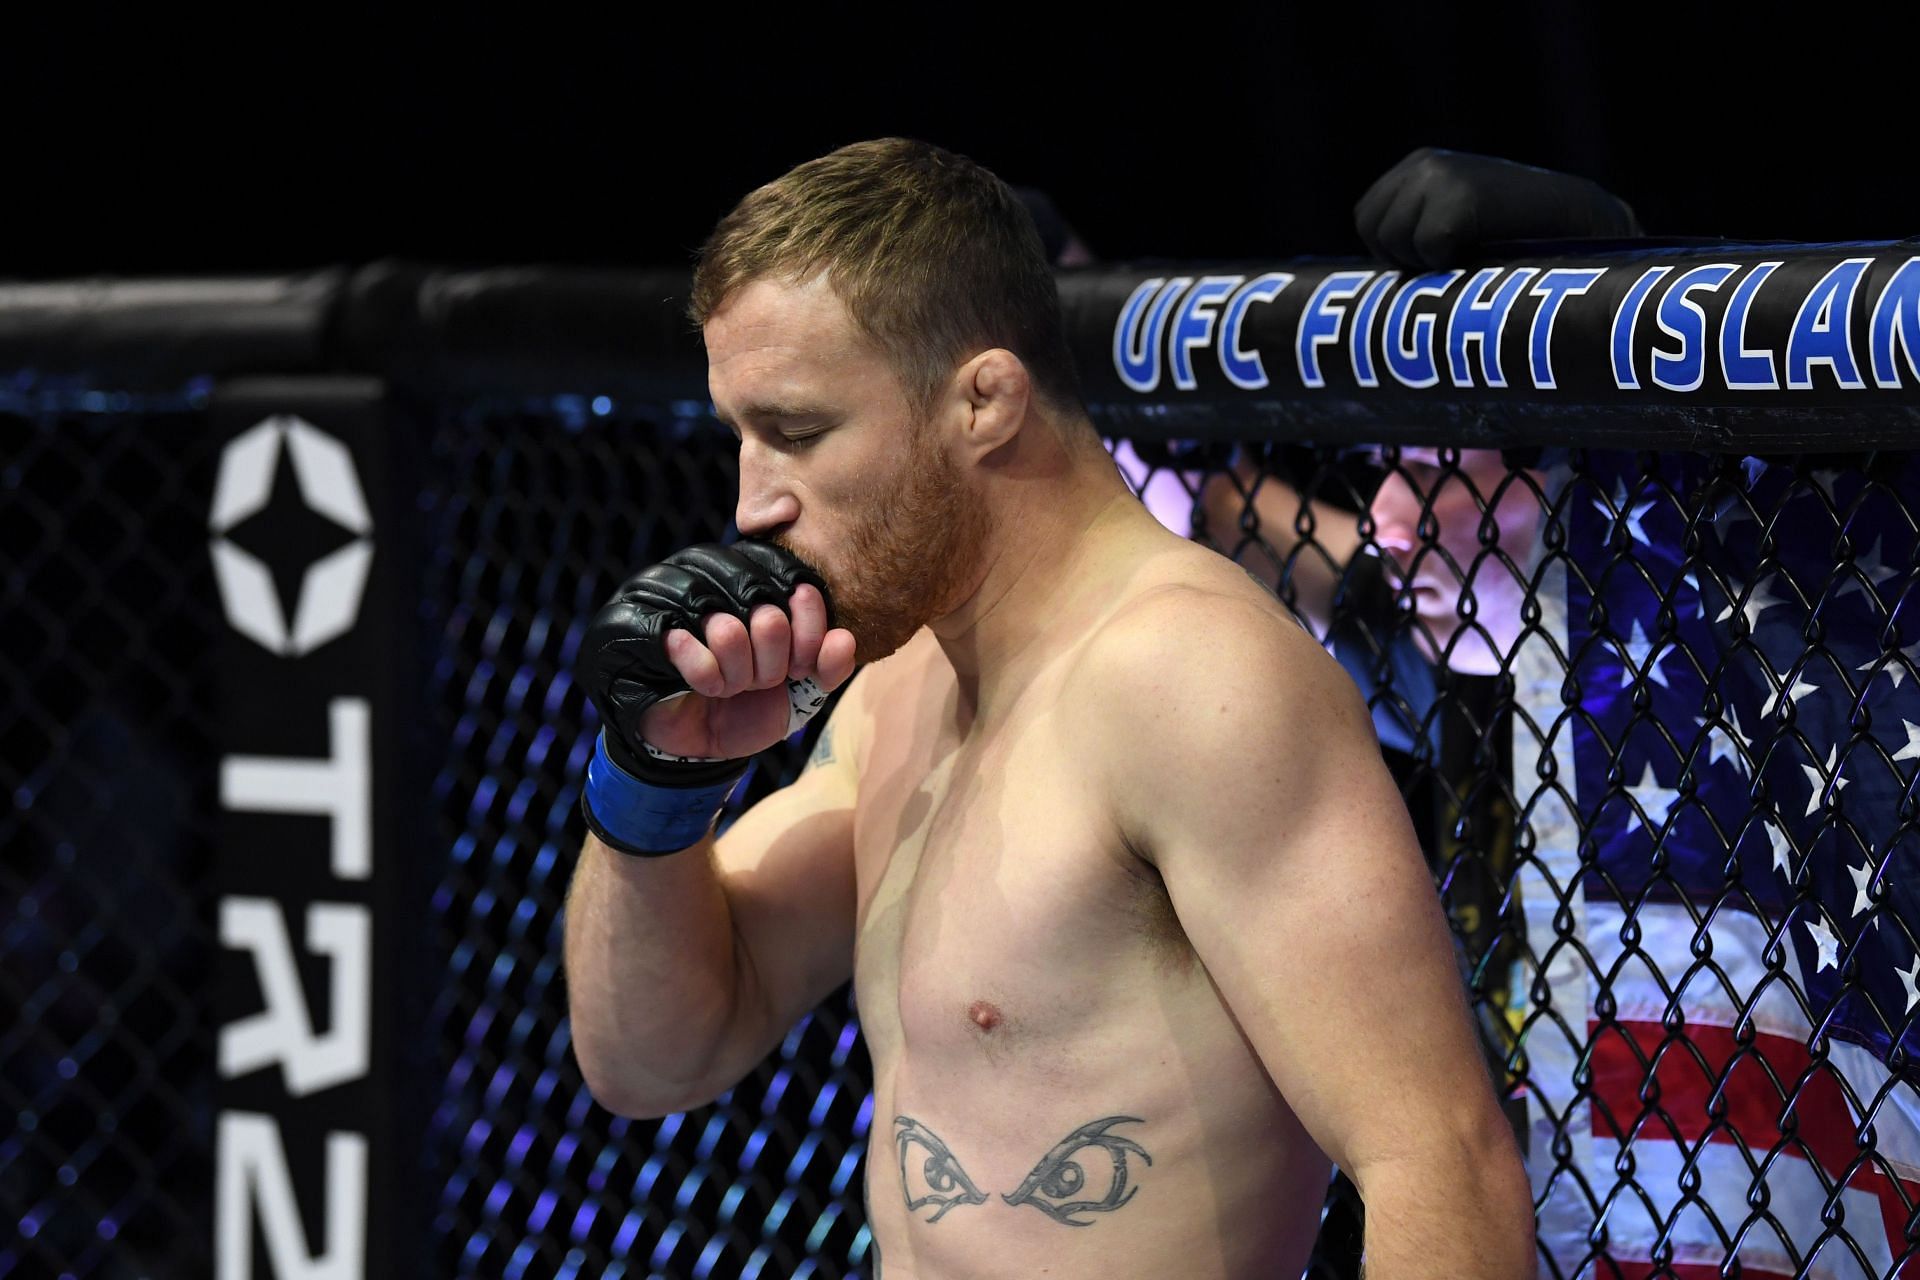 Justin Gaethje will be challenging next for the UFC lightweight title